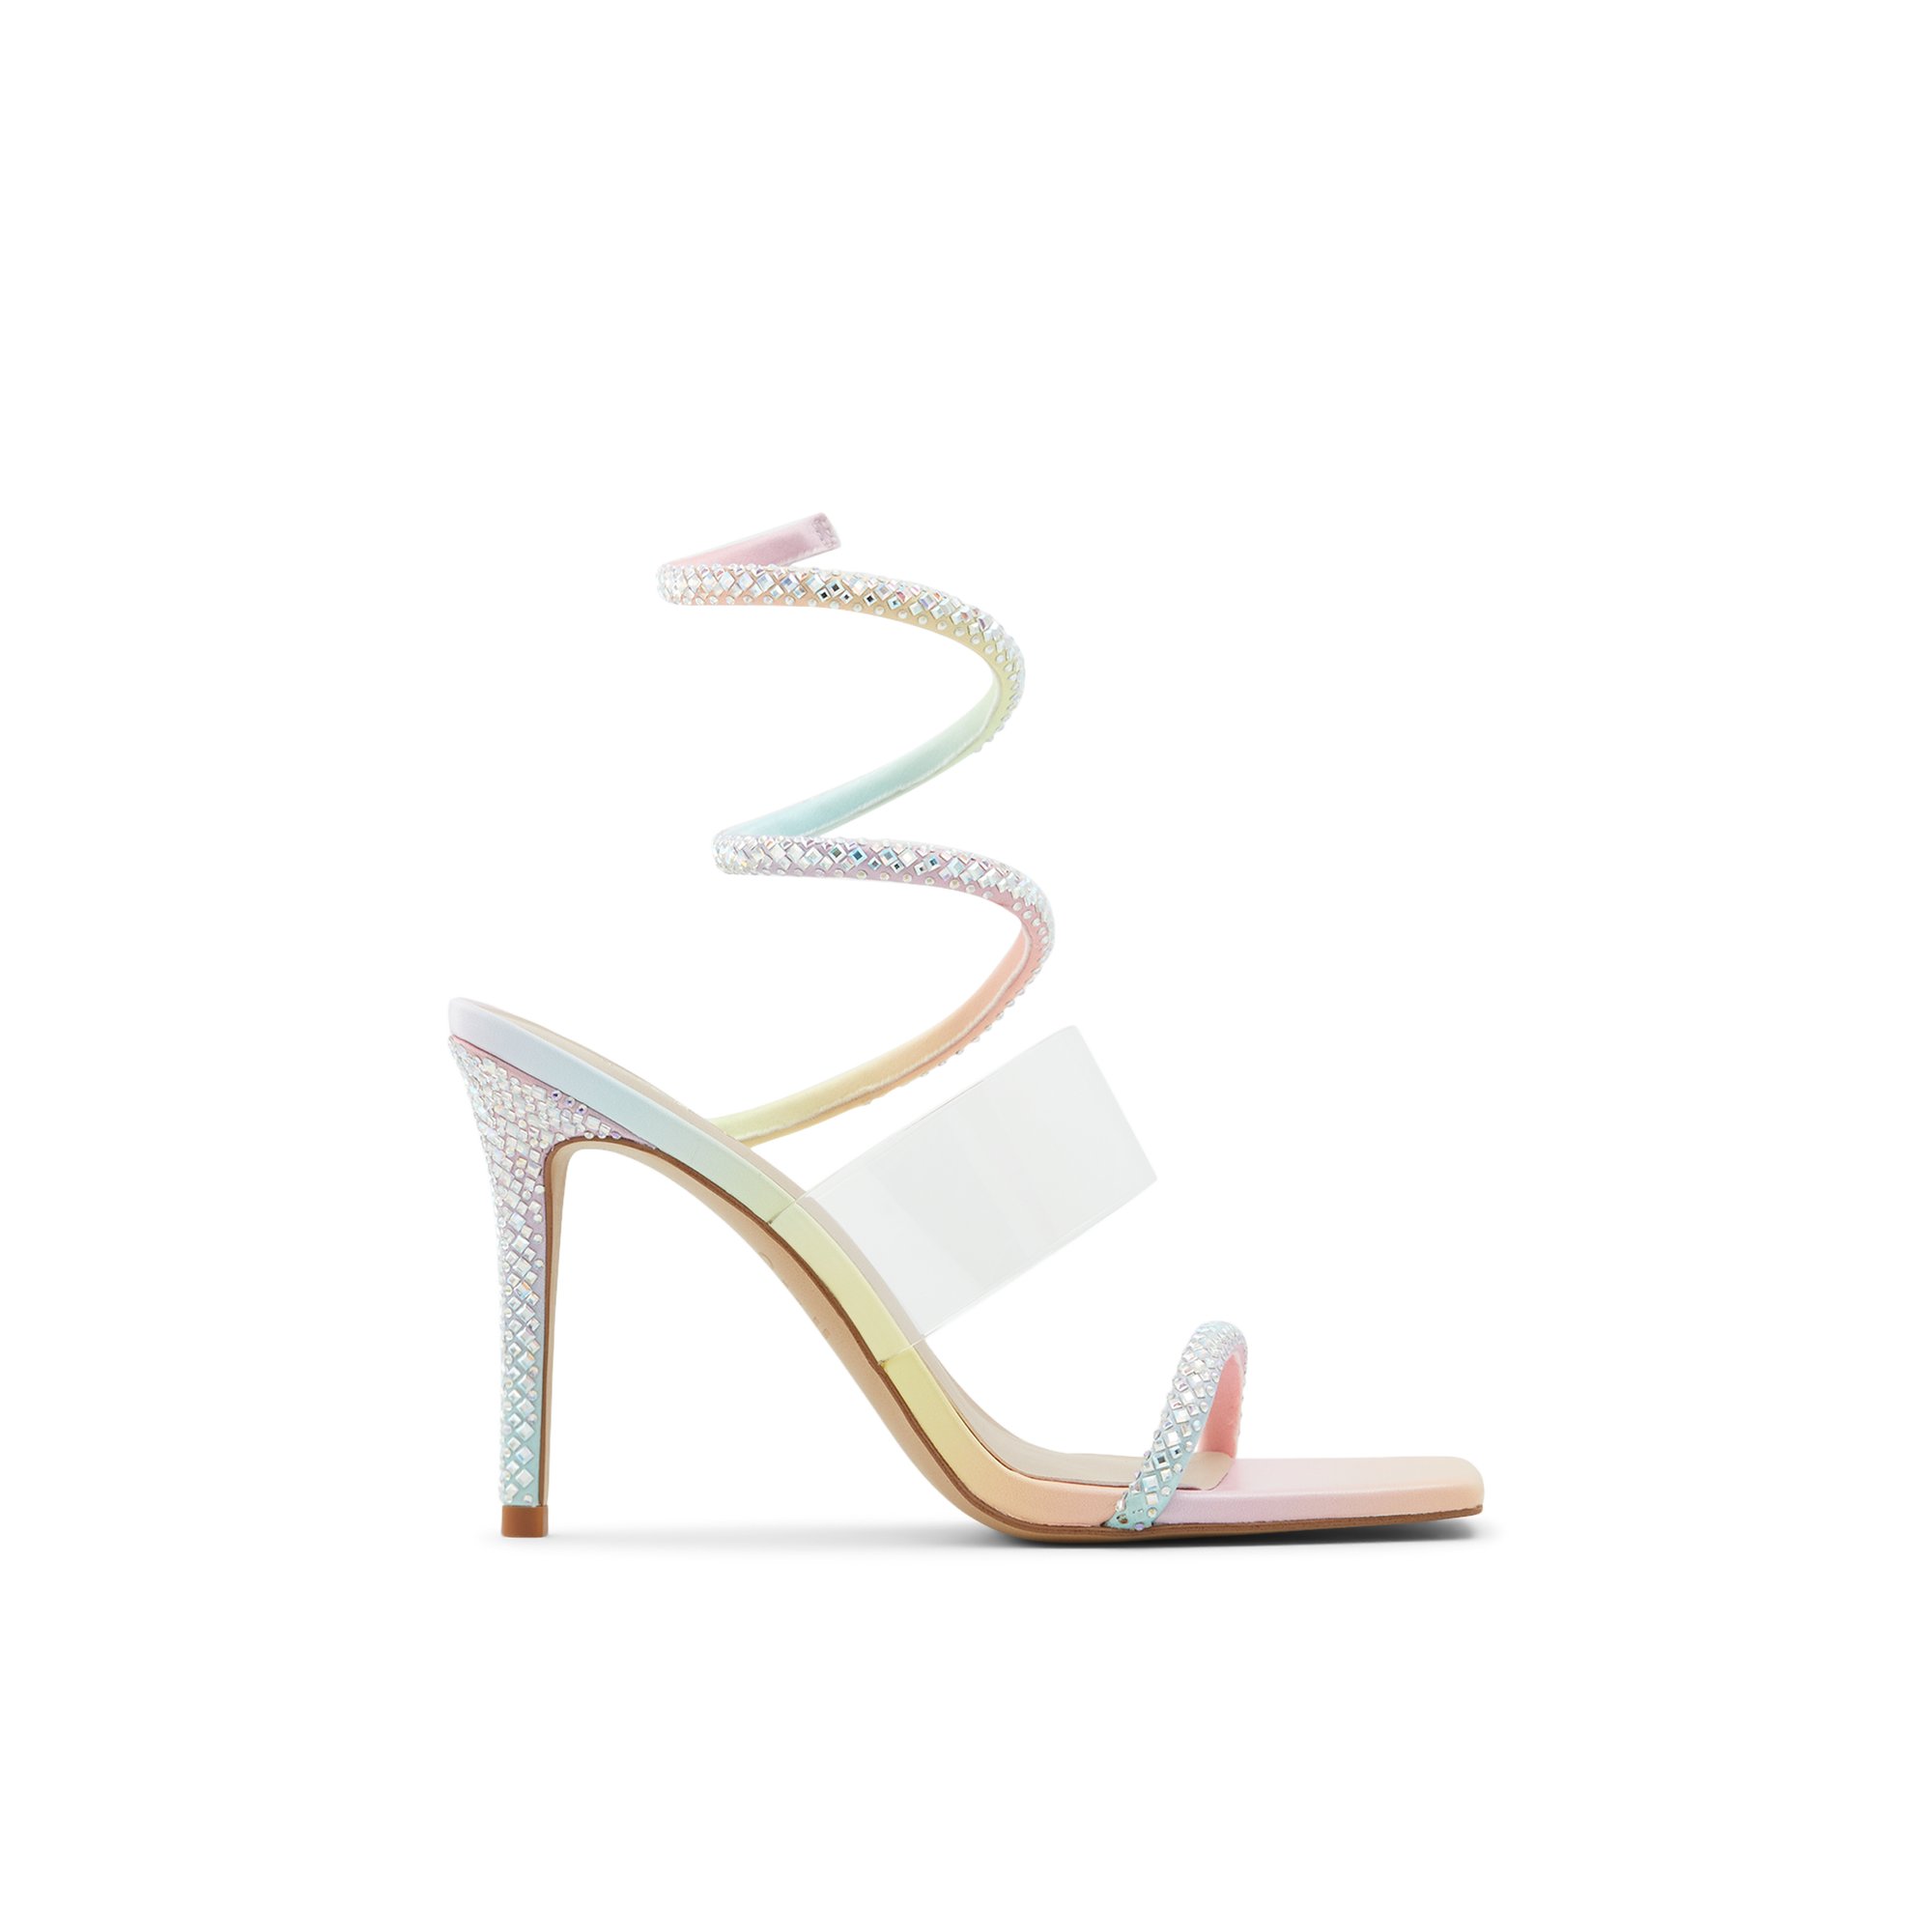 Image of ALDO Selima - Women's Special Occasion Collection - Pastel, Size 6.5